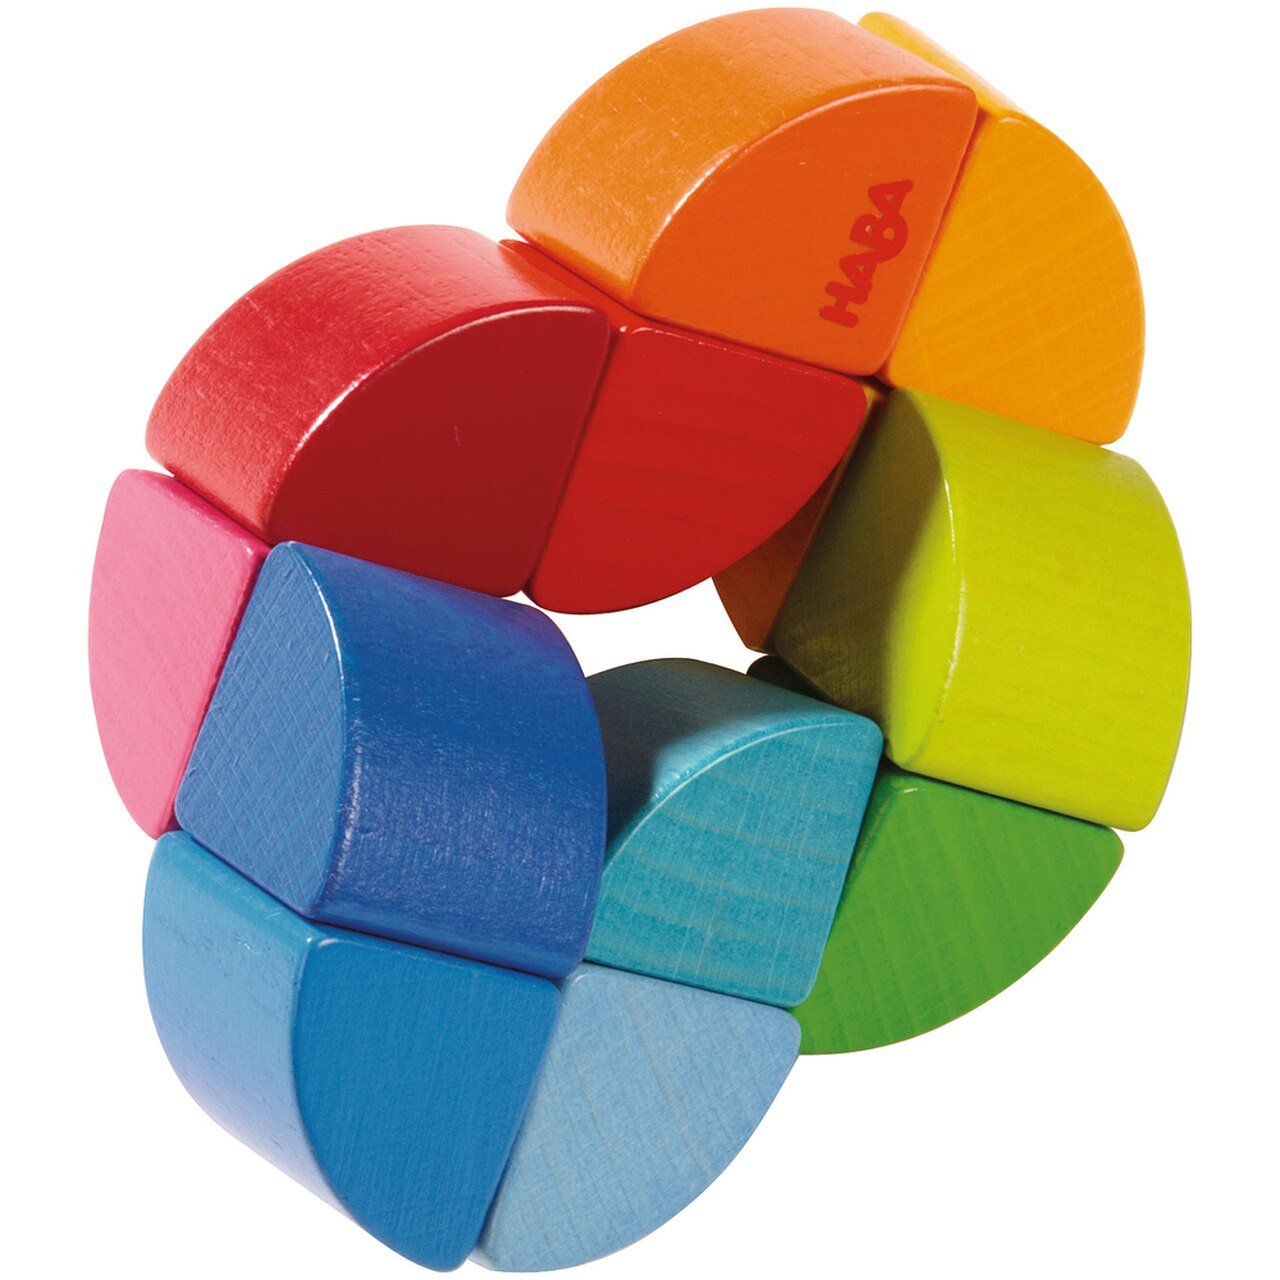 HABA Rainbow Ring Clutching Toy - Wood Wood Toys Canada's Favourite Montessori Toy Store